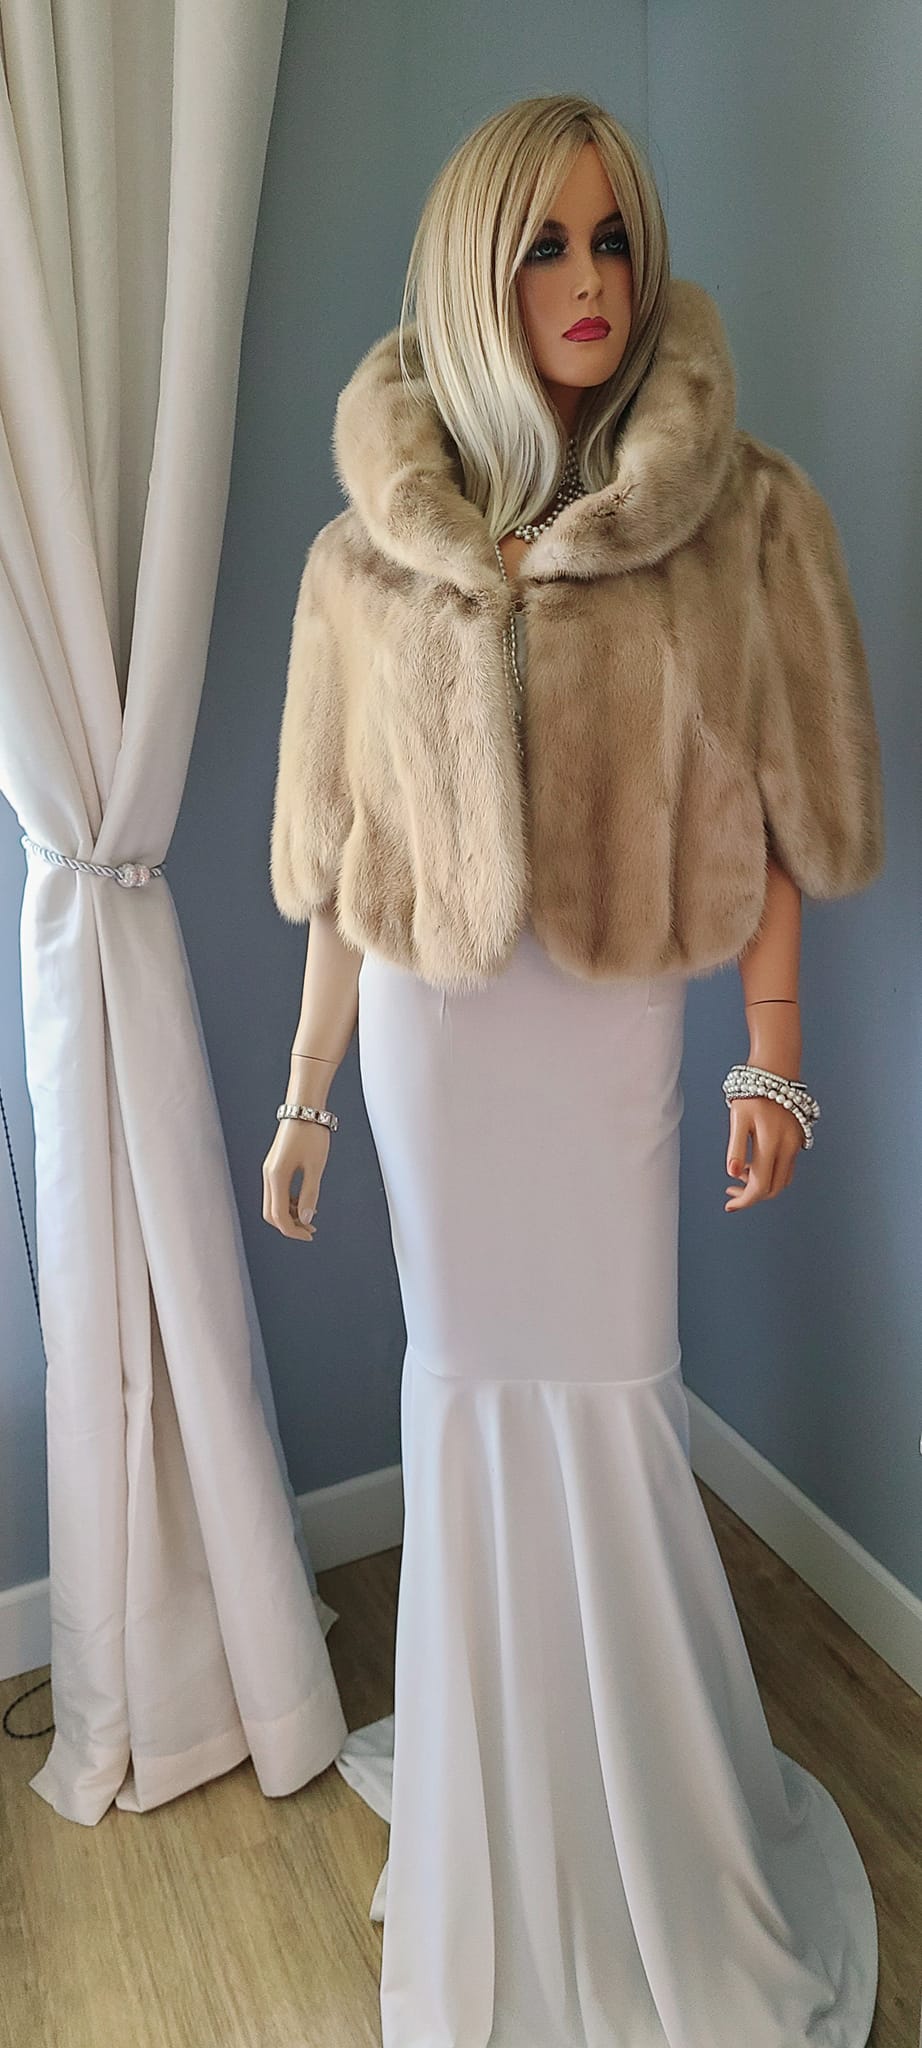 Sold at Auction: Mink Jacket/Shawl